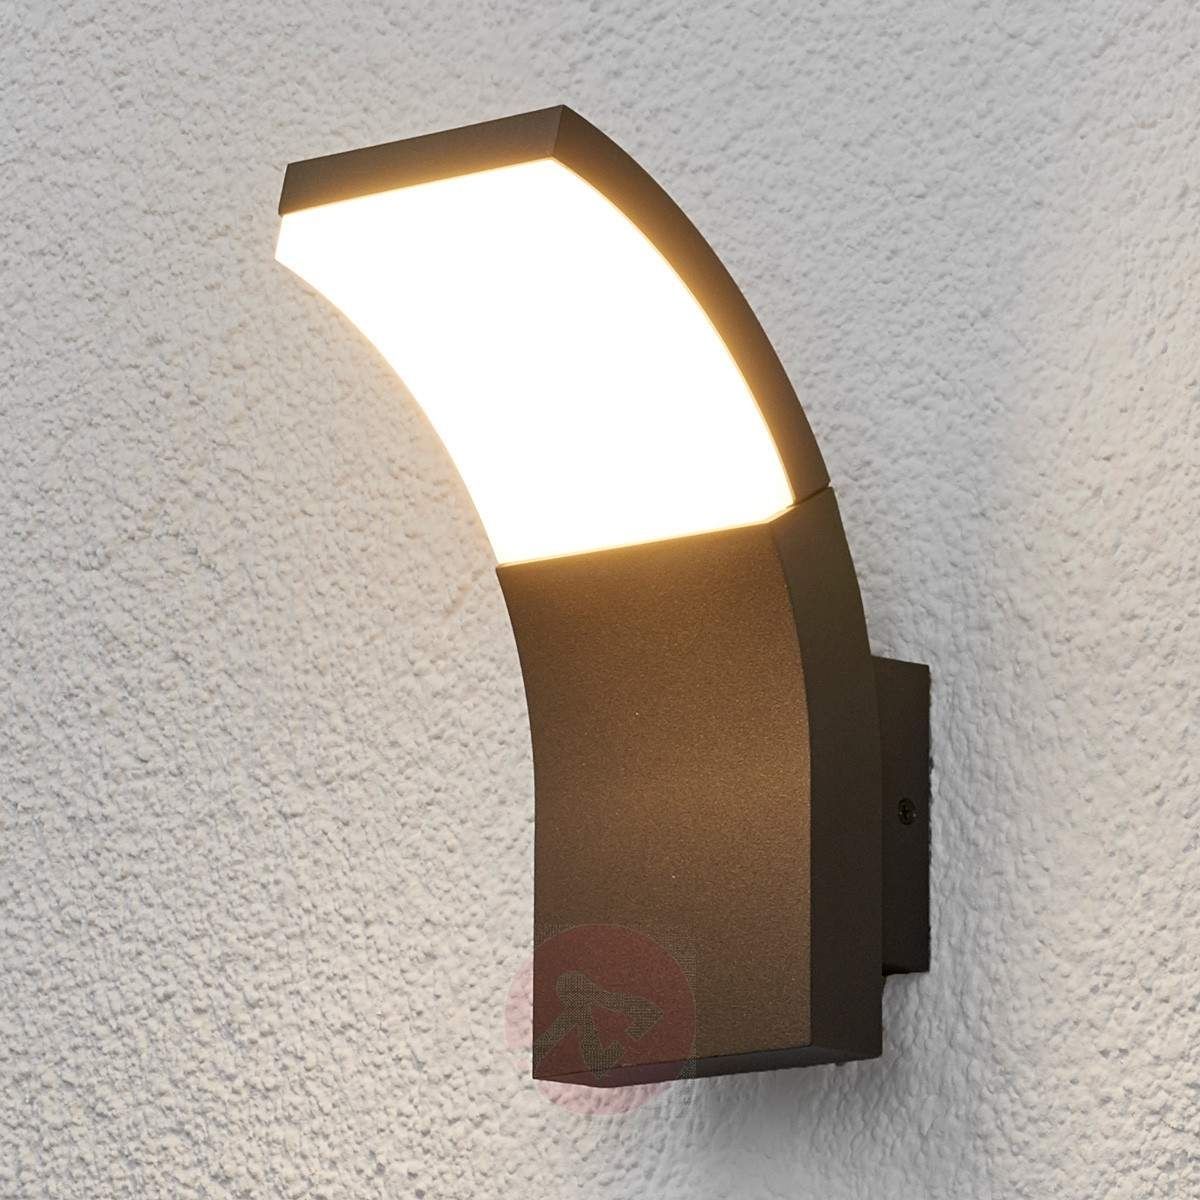 Led Outdoor Wall Light Timm | Lights (View 5 of 15)